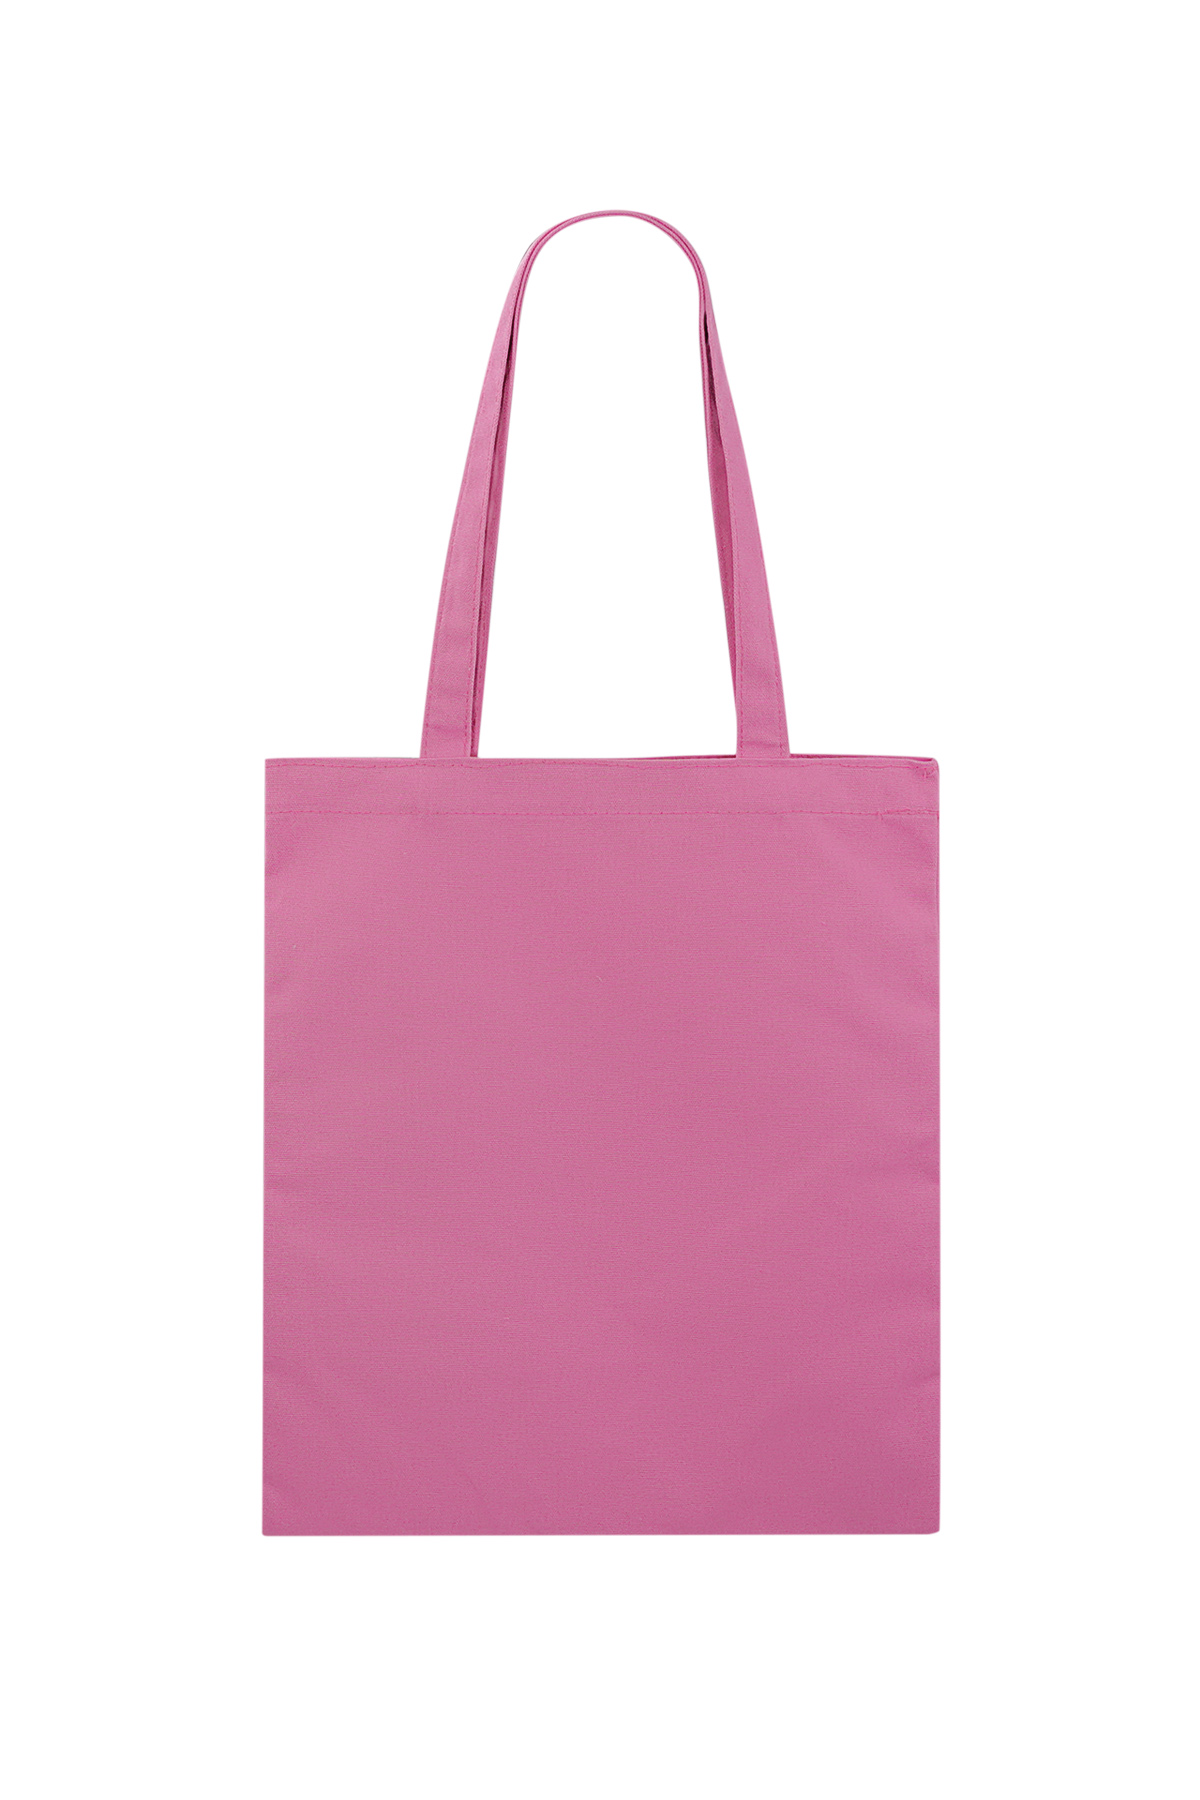 Canvas shopper yhwng must-haves - fuchsia h5 Picture4